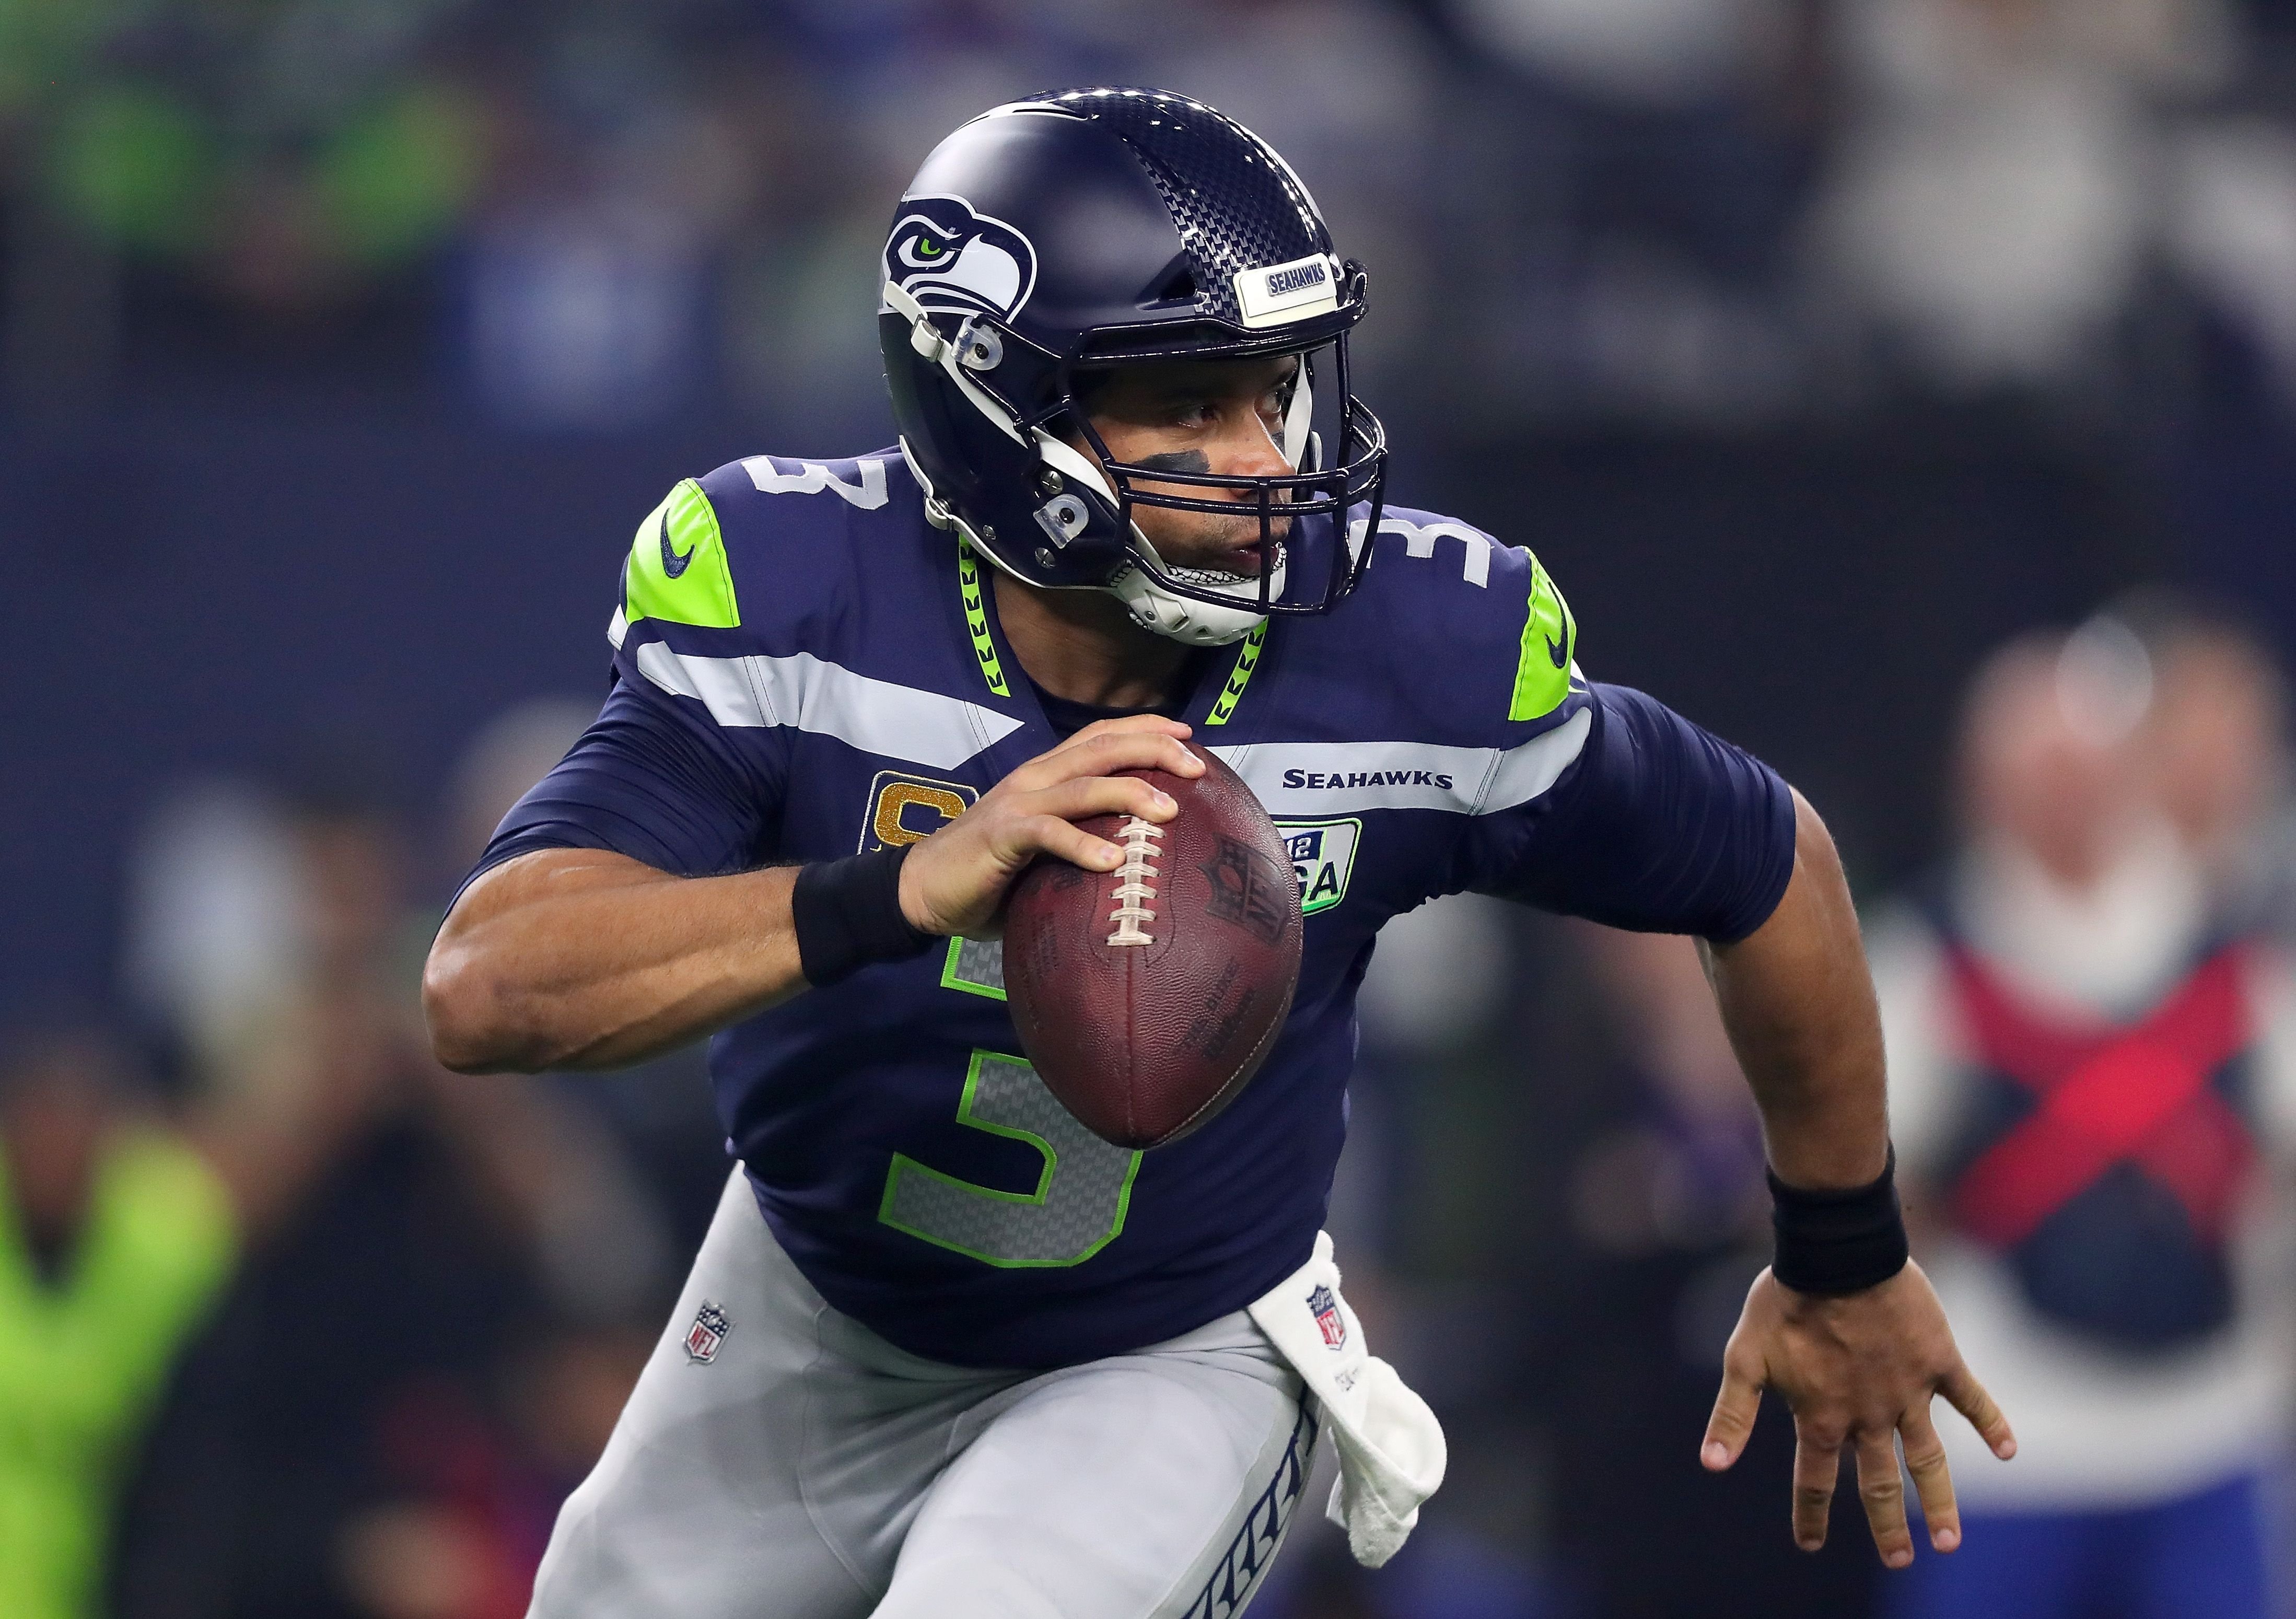 Football player Russell Wilson scrambles in the pocket against the Dallas Cowboys on January 05, 2019 in Texas. | Photo: Getty Images